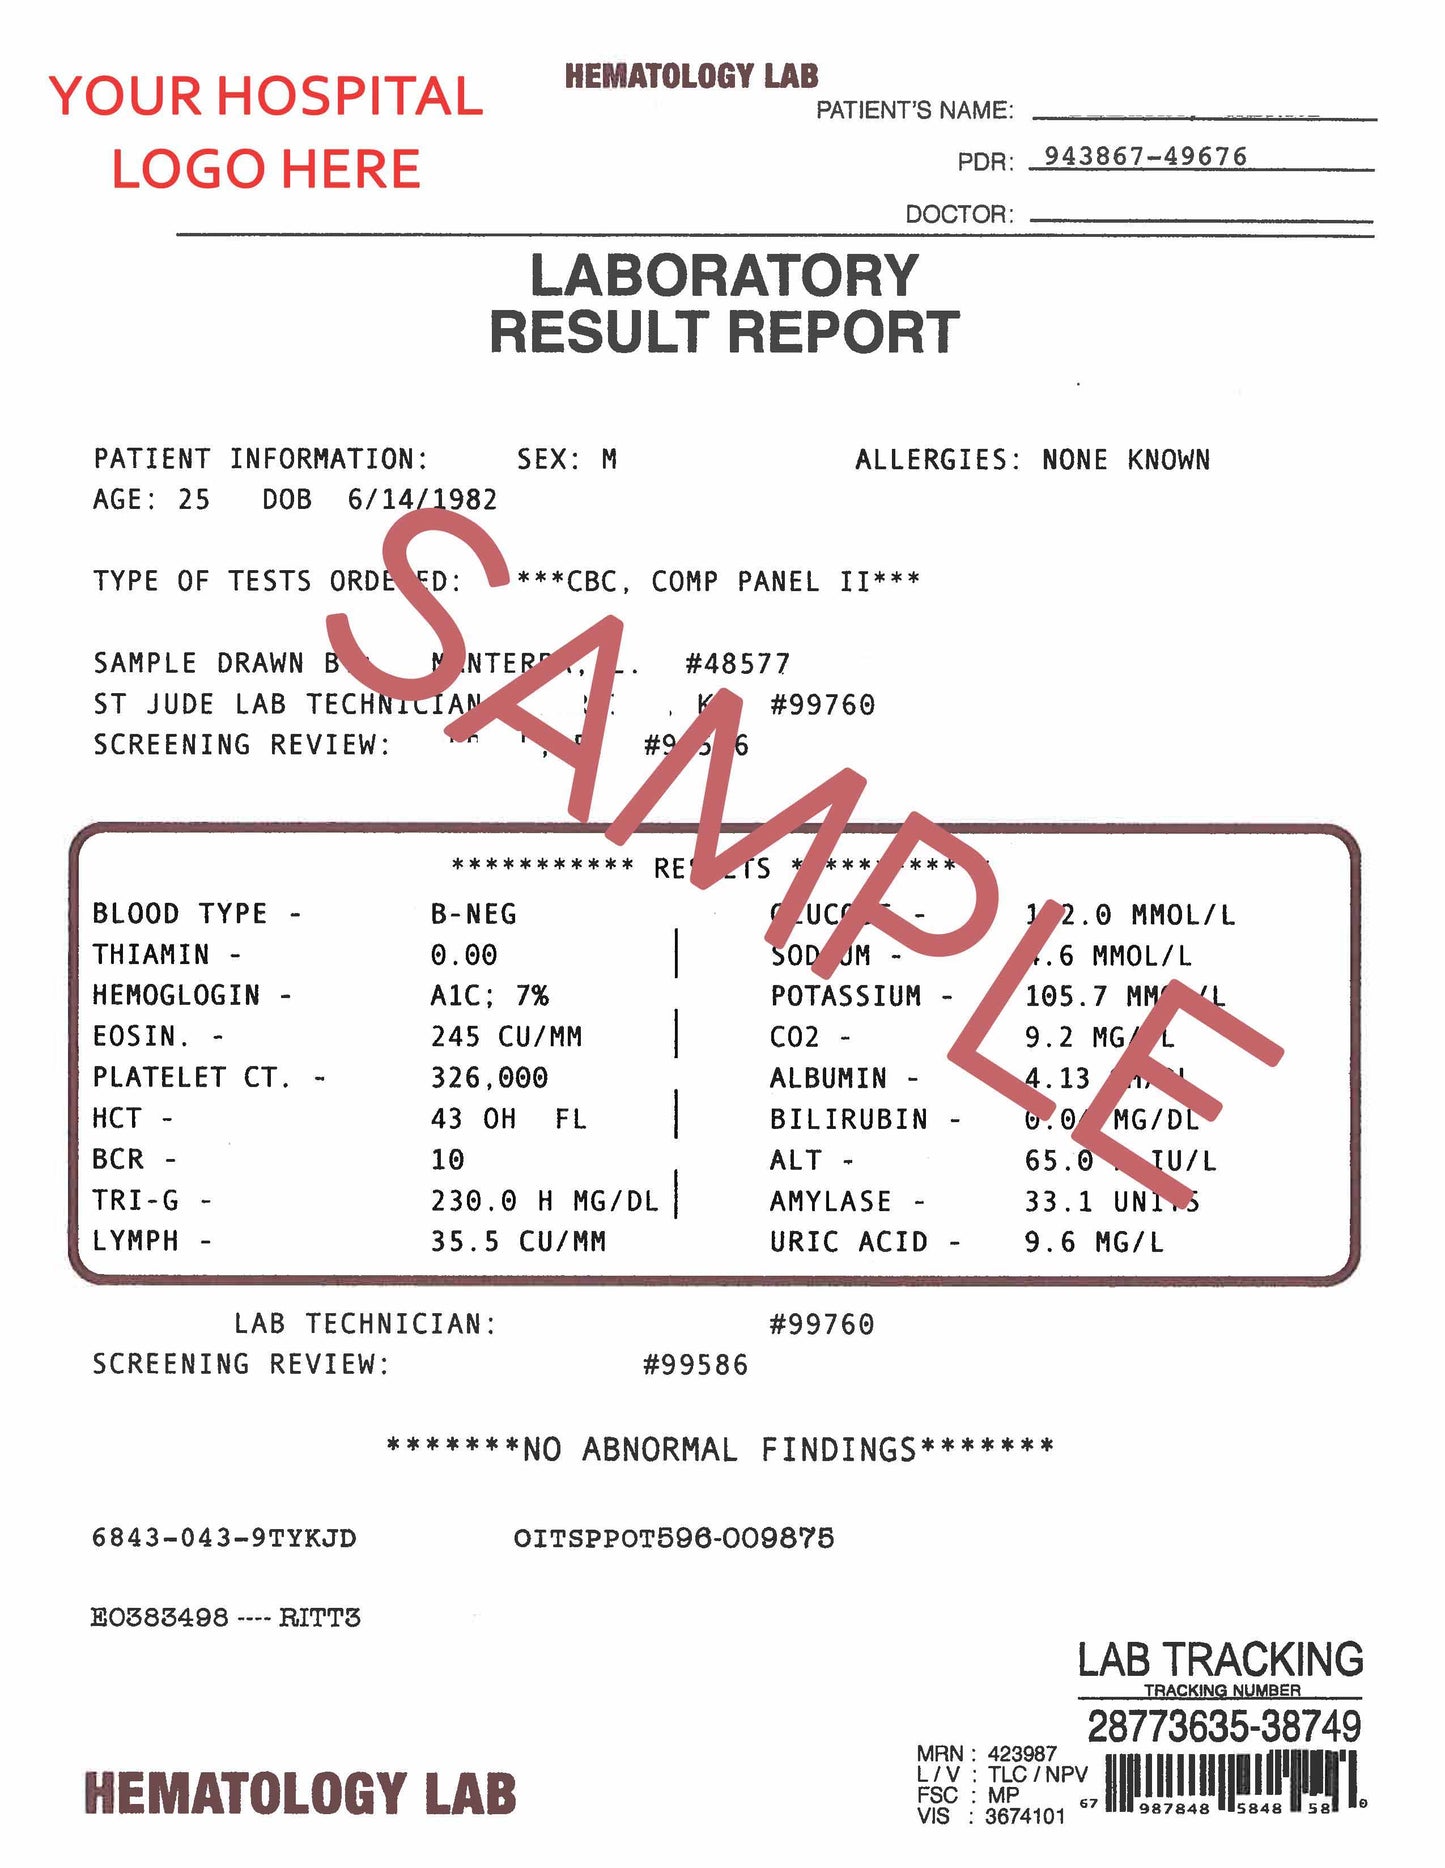 Laboratory Result Report (4 pages)